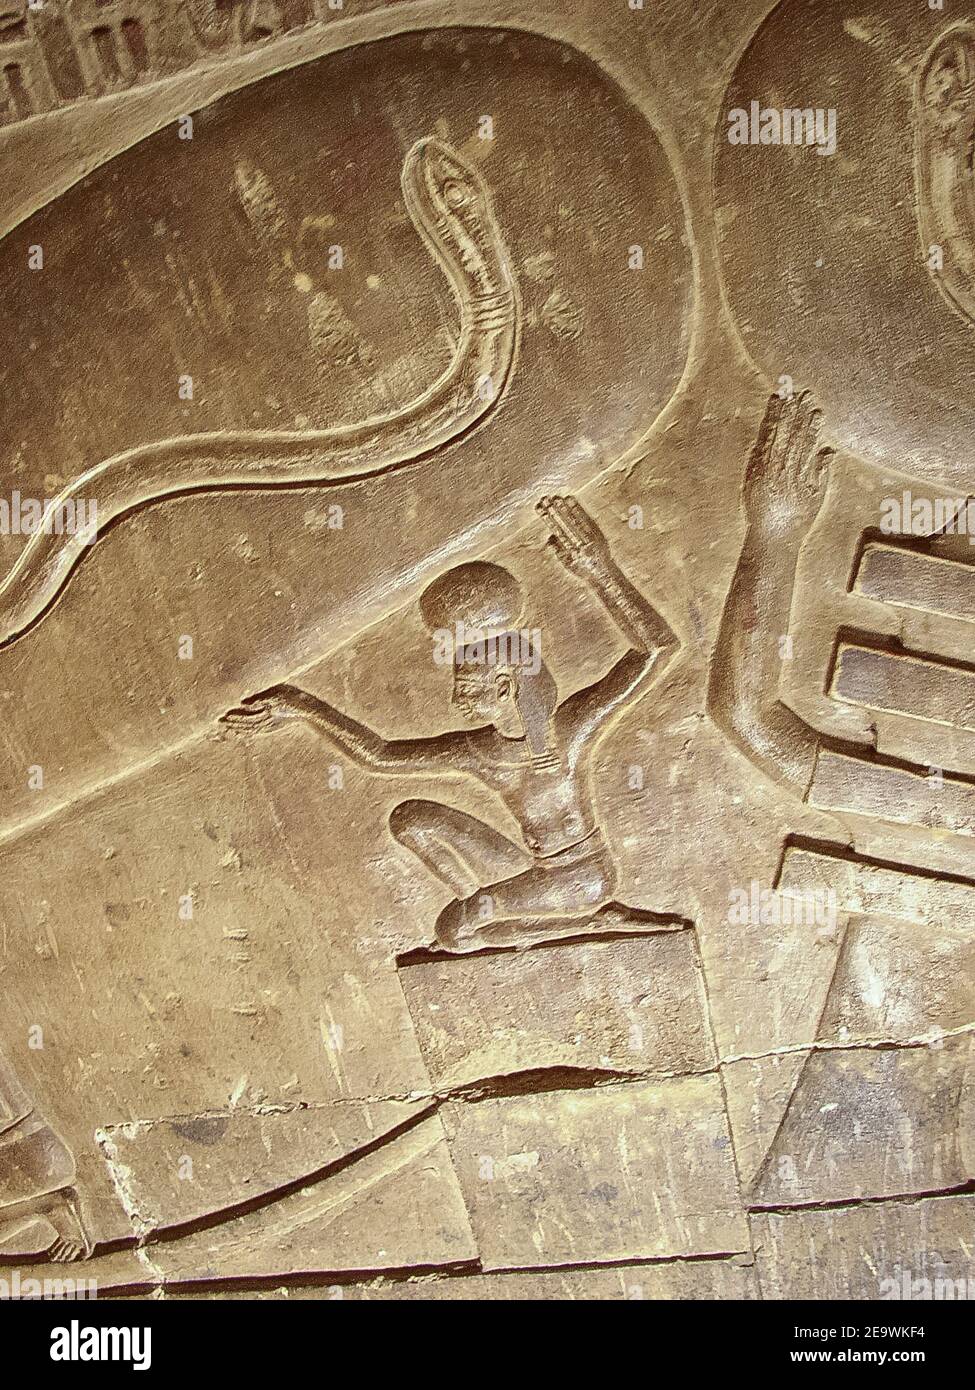 Egypt, Dendera temple, in a room, strange scene called "light bulb",  sometimes (wrongly) seen as a proof that Ancient Egyptians knew electricity  Stock Photo - Alamy